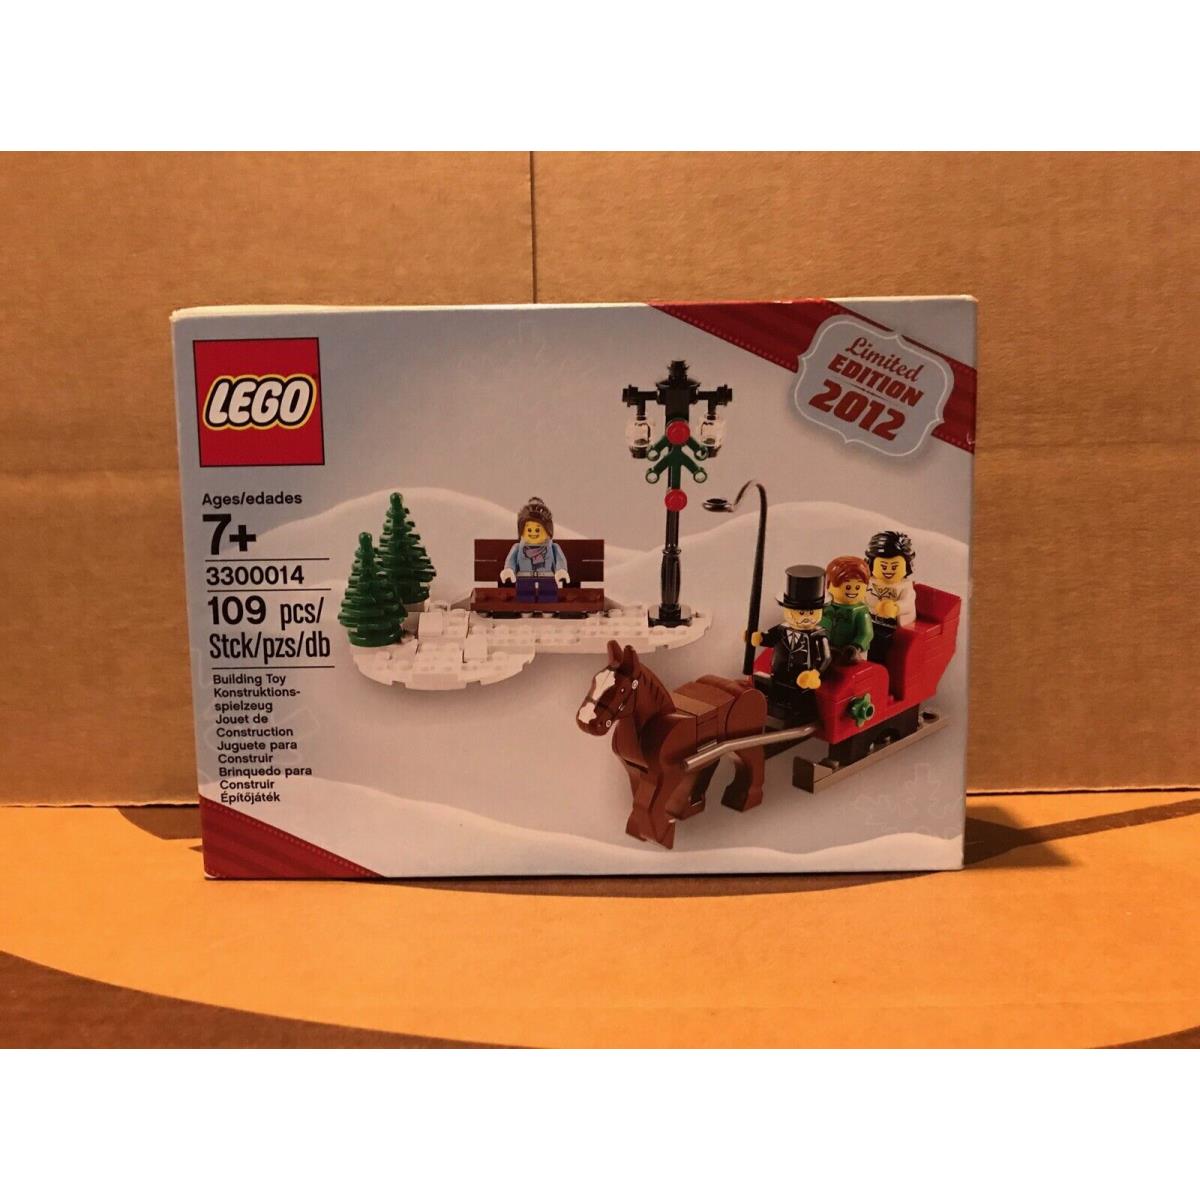 Lego Limited Edition - Sleigh Ride - 3300014 - - Imperfect Box